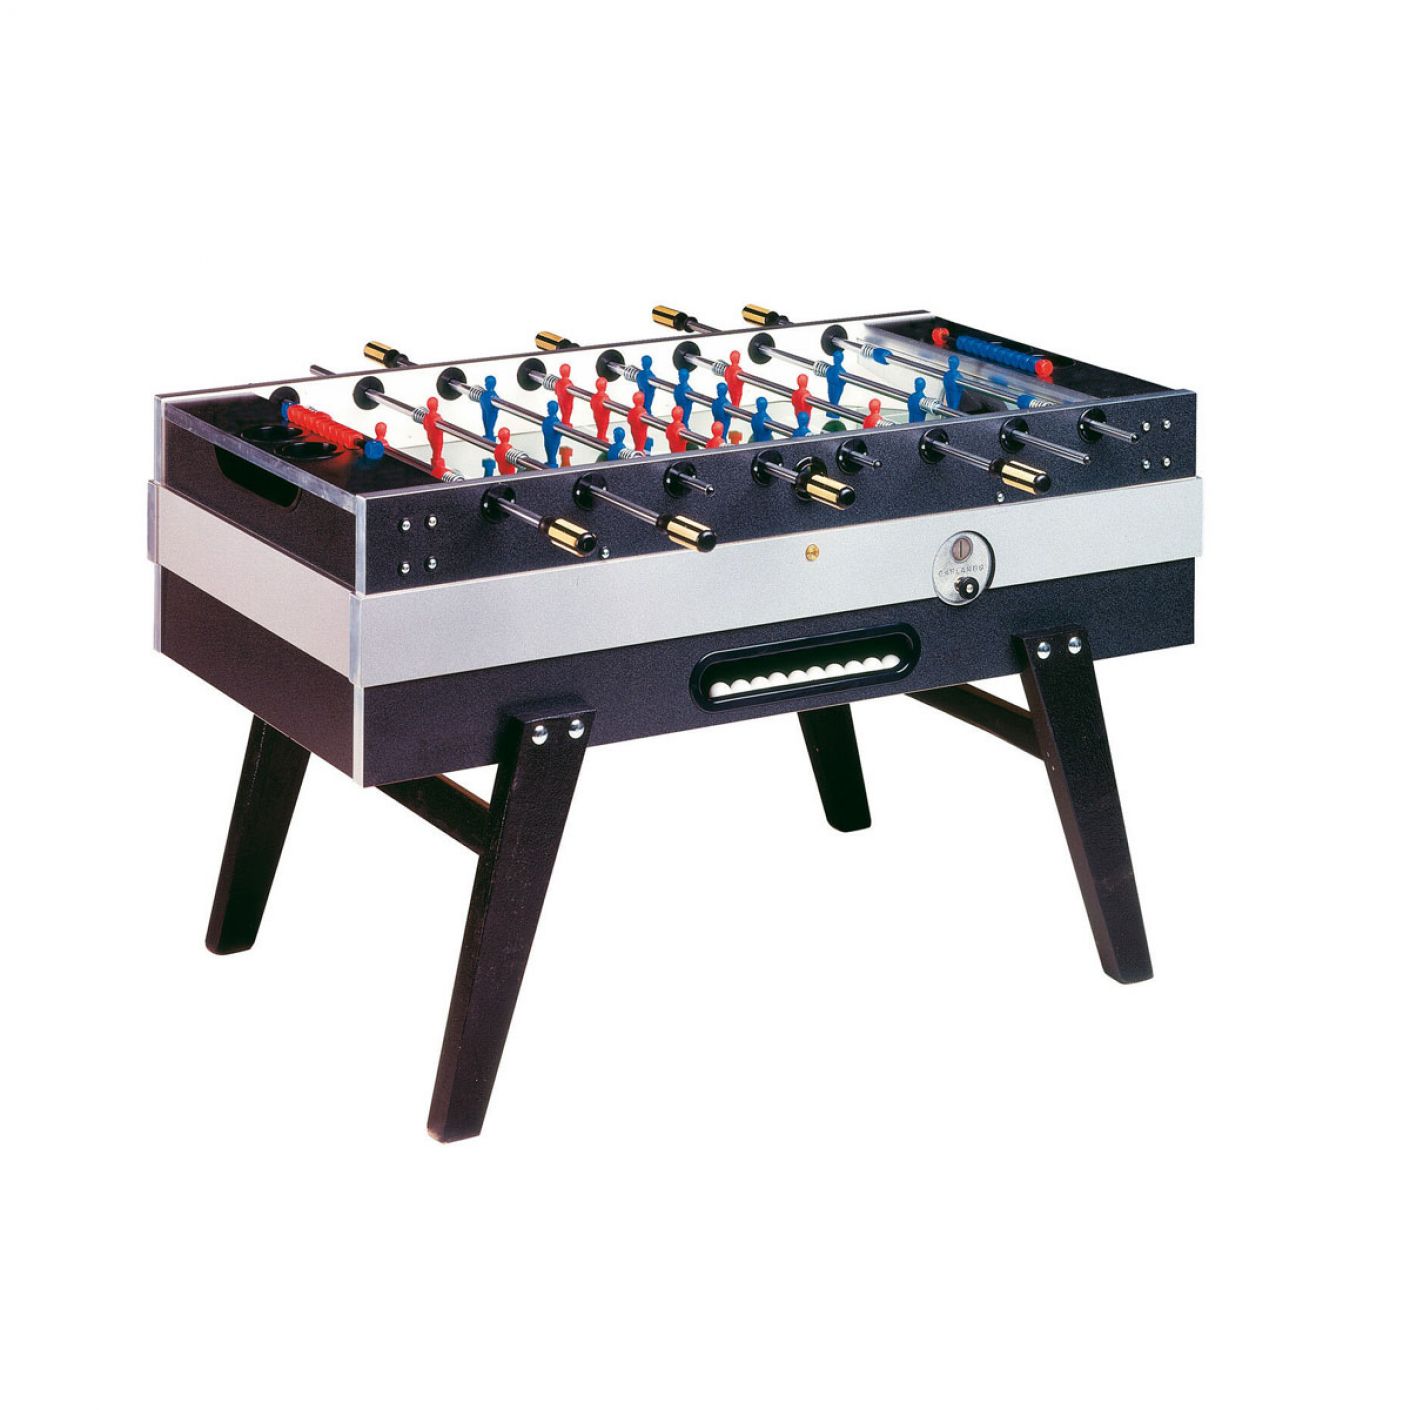 Garlando Deluxe Table Football with outgoing rods